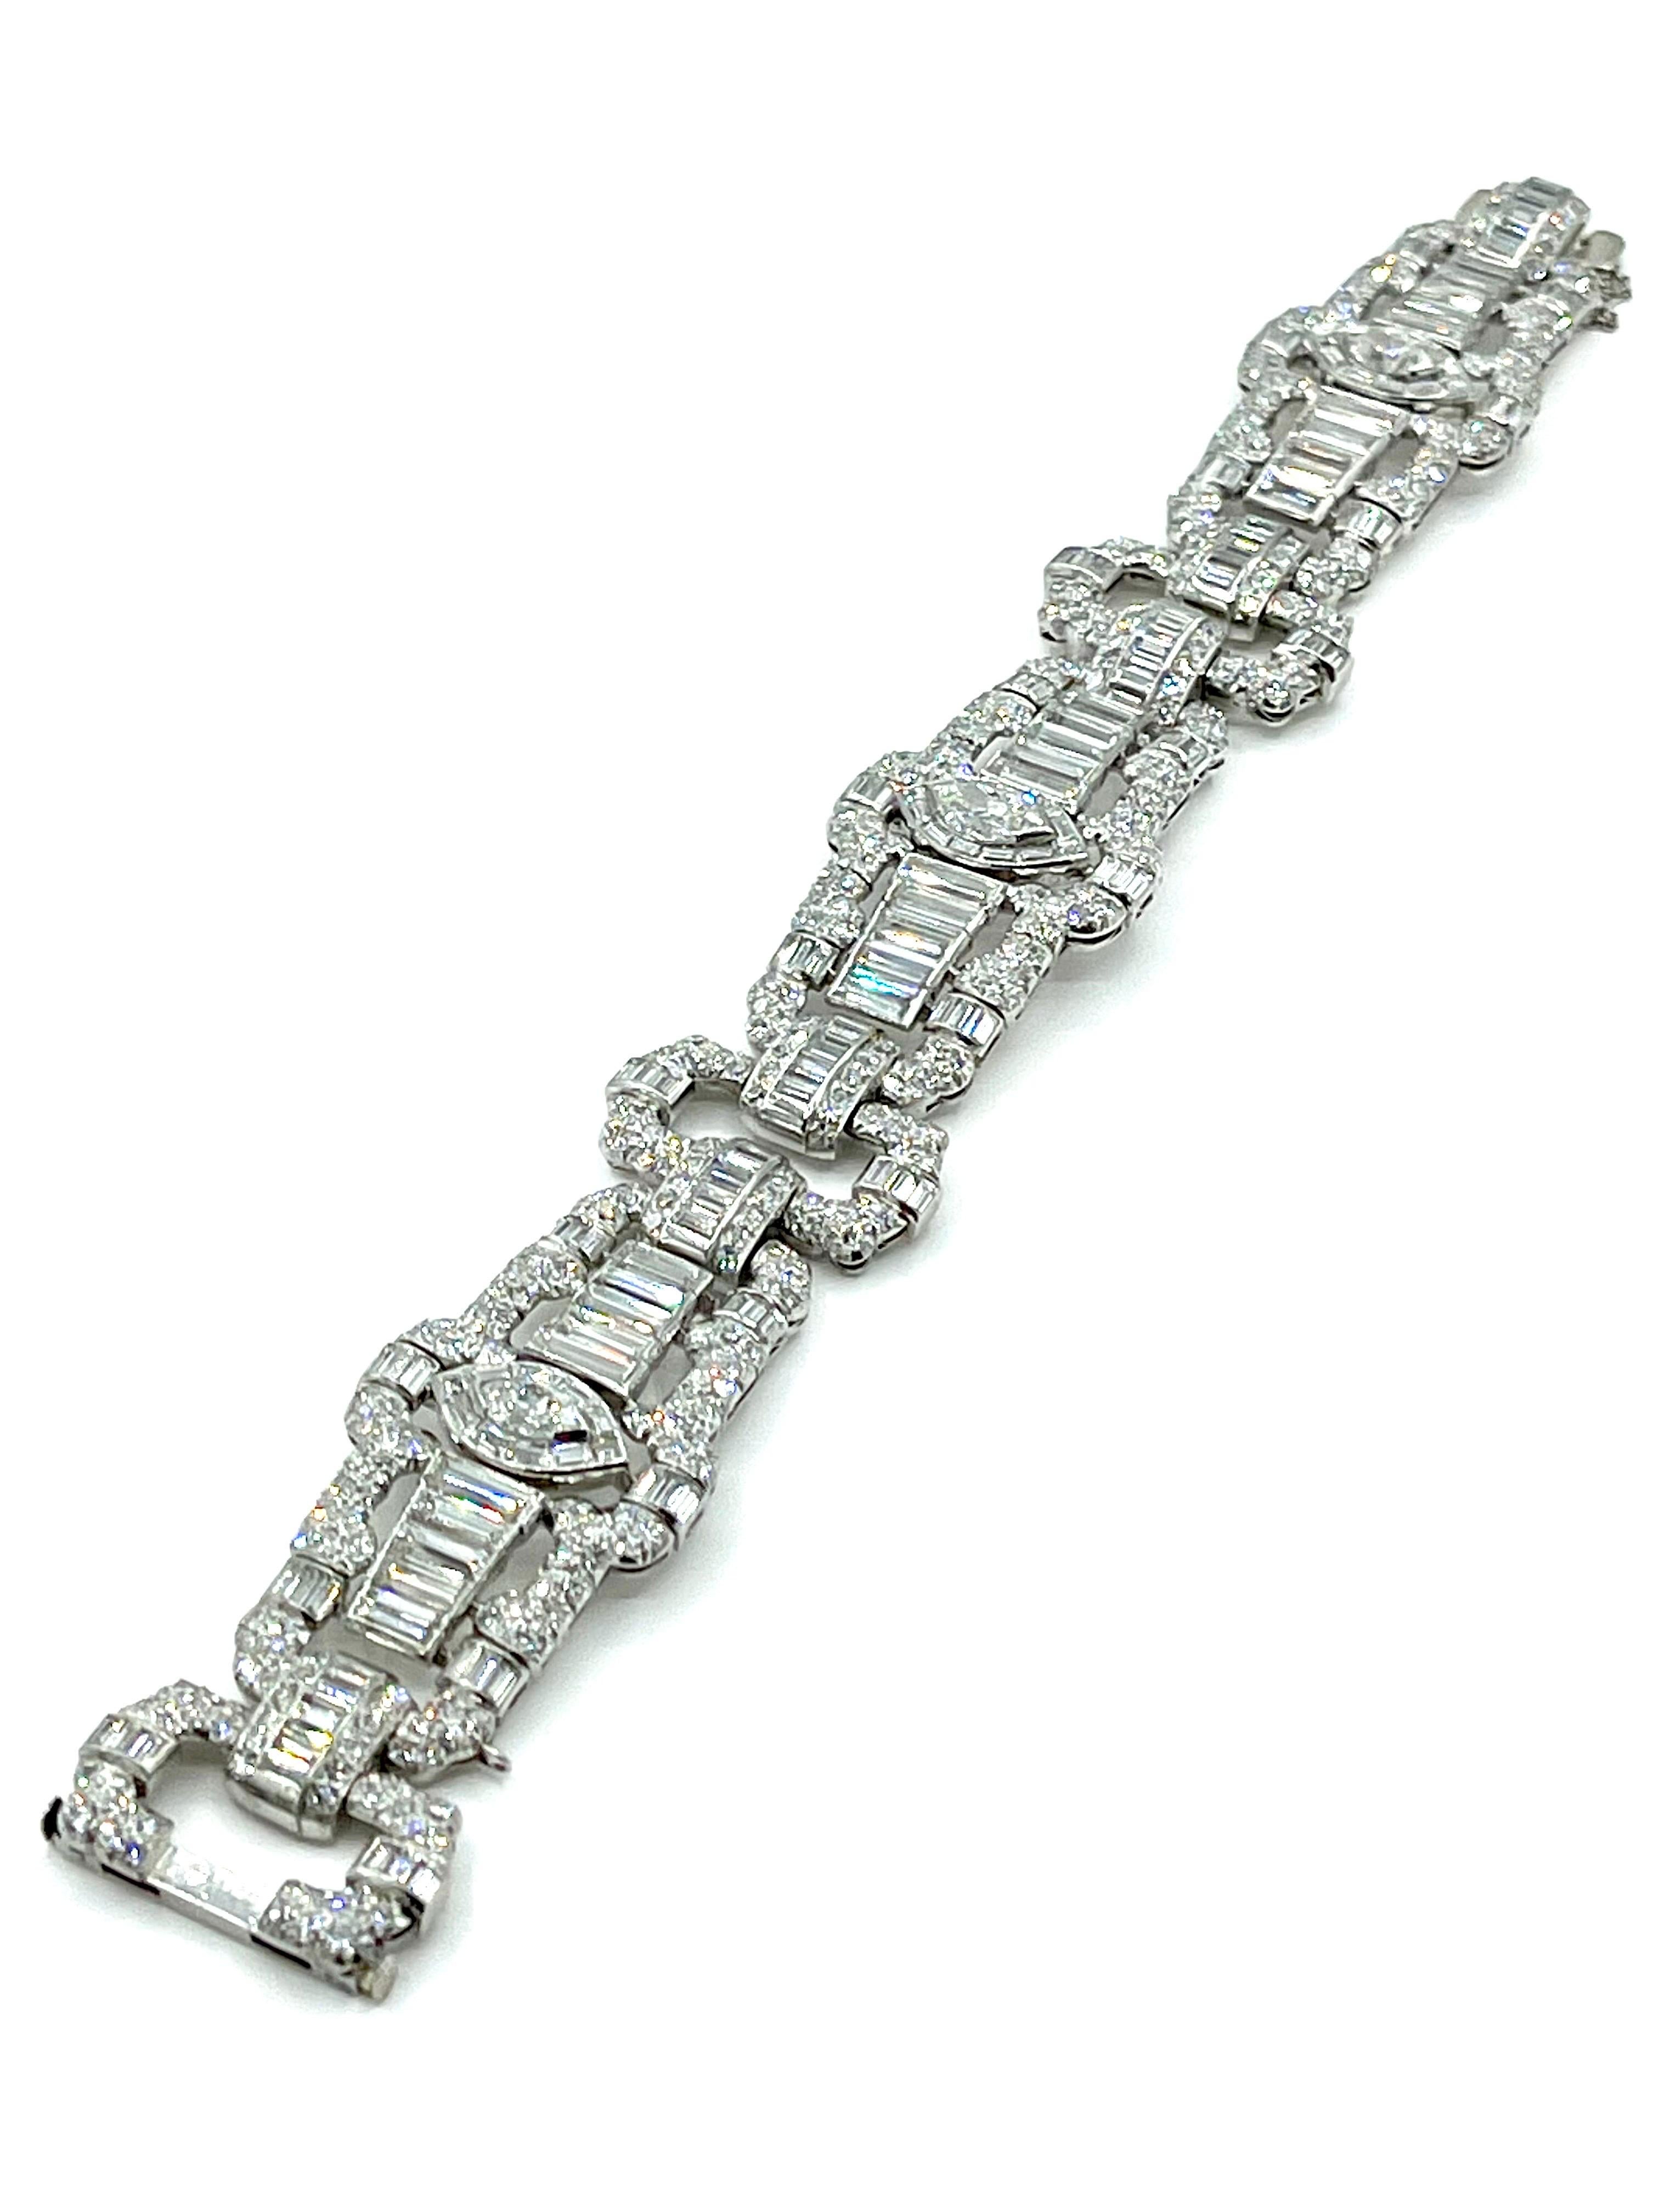 This is such a stunning Art Deco Diamond bracelet!  The bracelet contains 633 Diamonds, of round single cut, marquise, and baguettes, all set in platinum.  The Diamonds combine for a total weight of 23.00 carats, and graded as G-I color, VS1-SI1